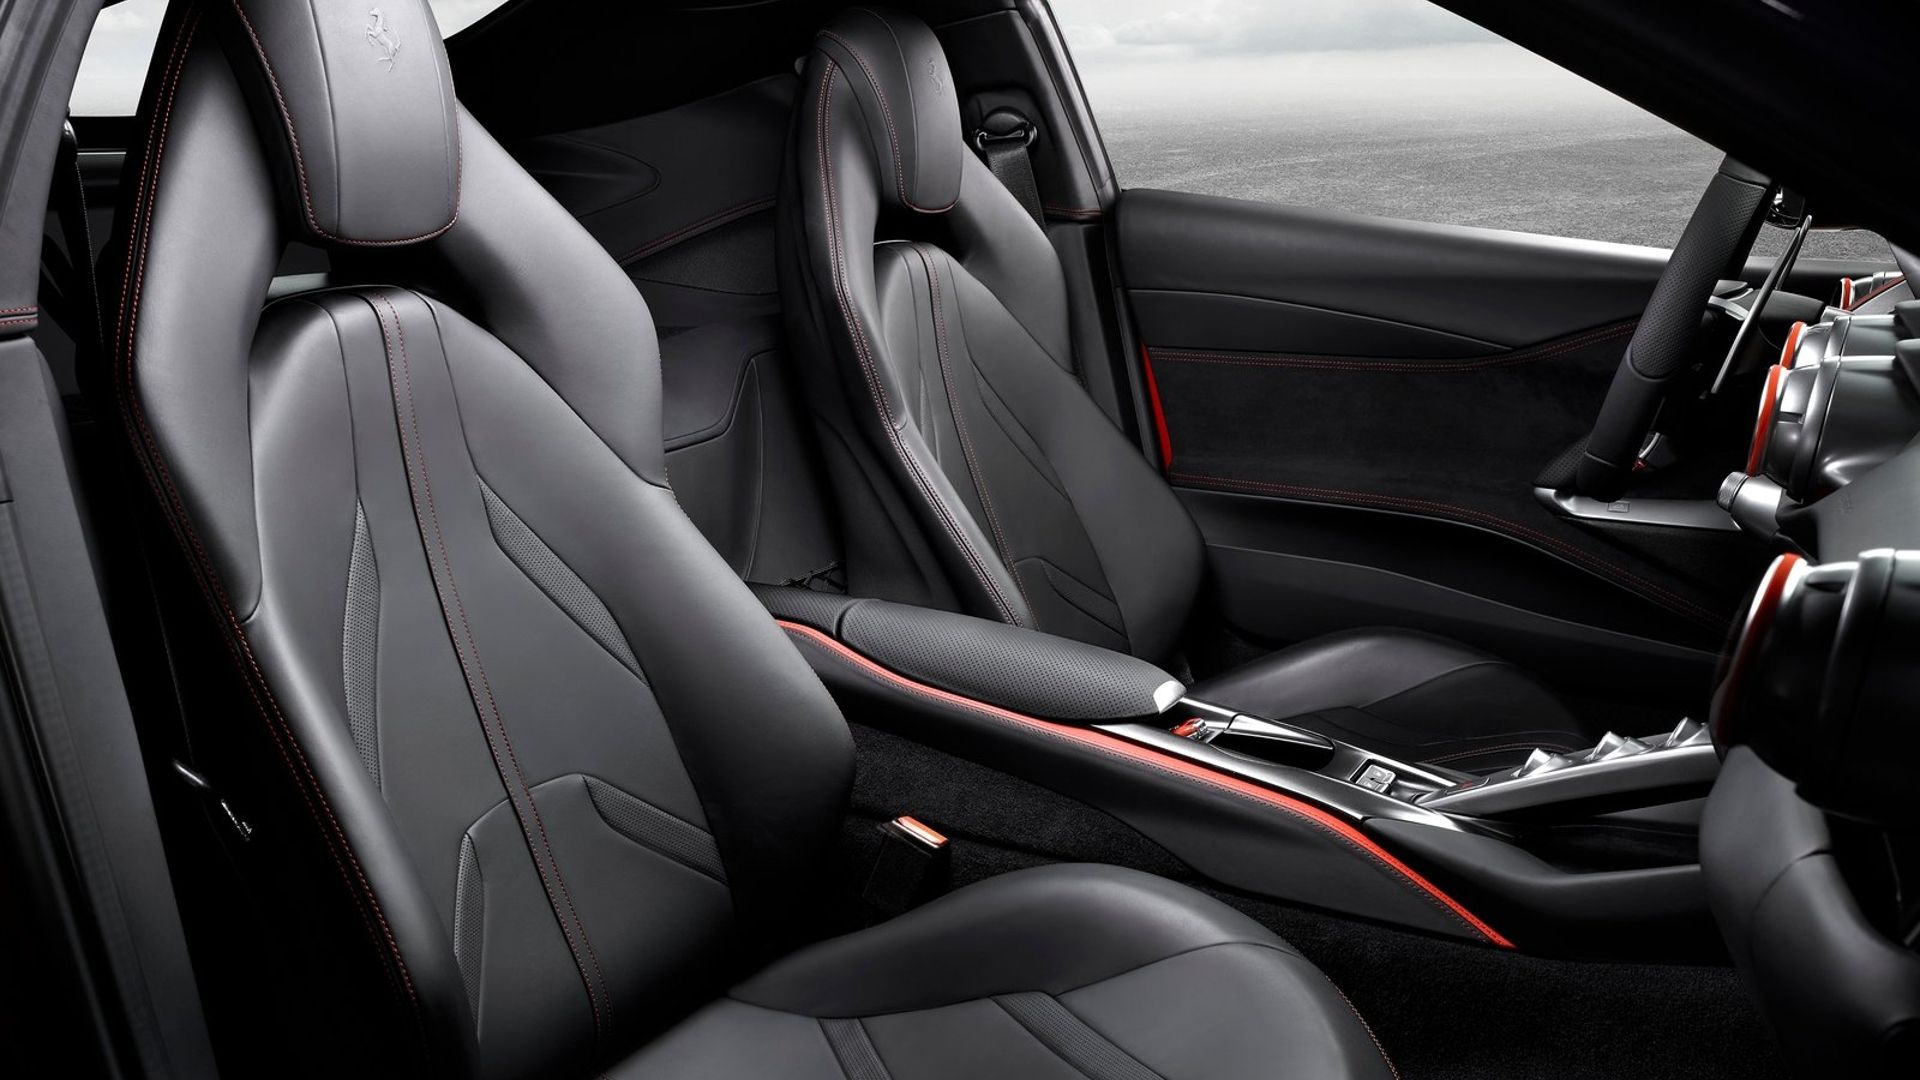 Image of the interior of the Ferrari 812 Superfast, showing the seats, dashboard, and steering wheel from the passenger side